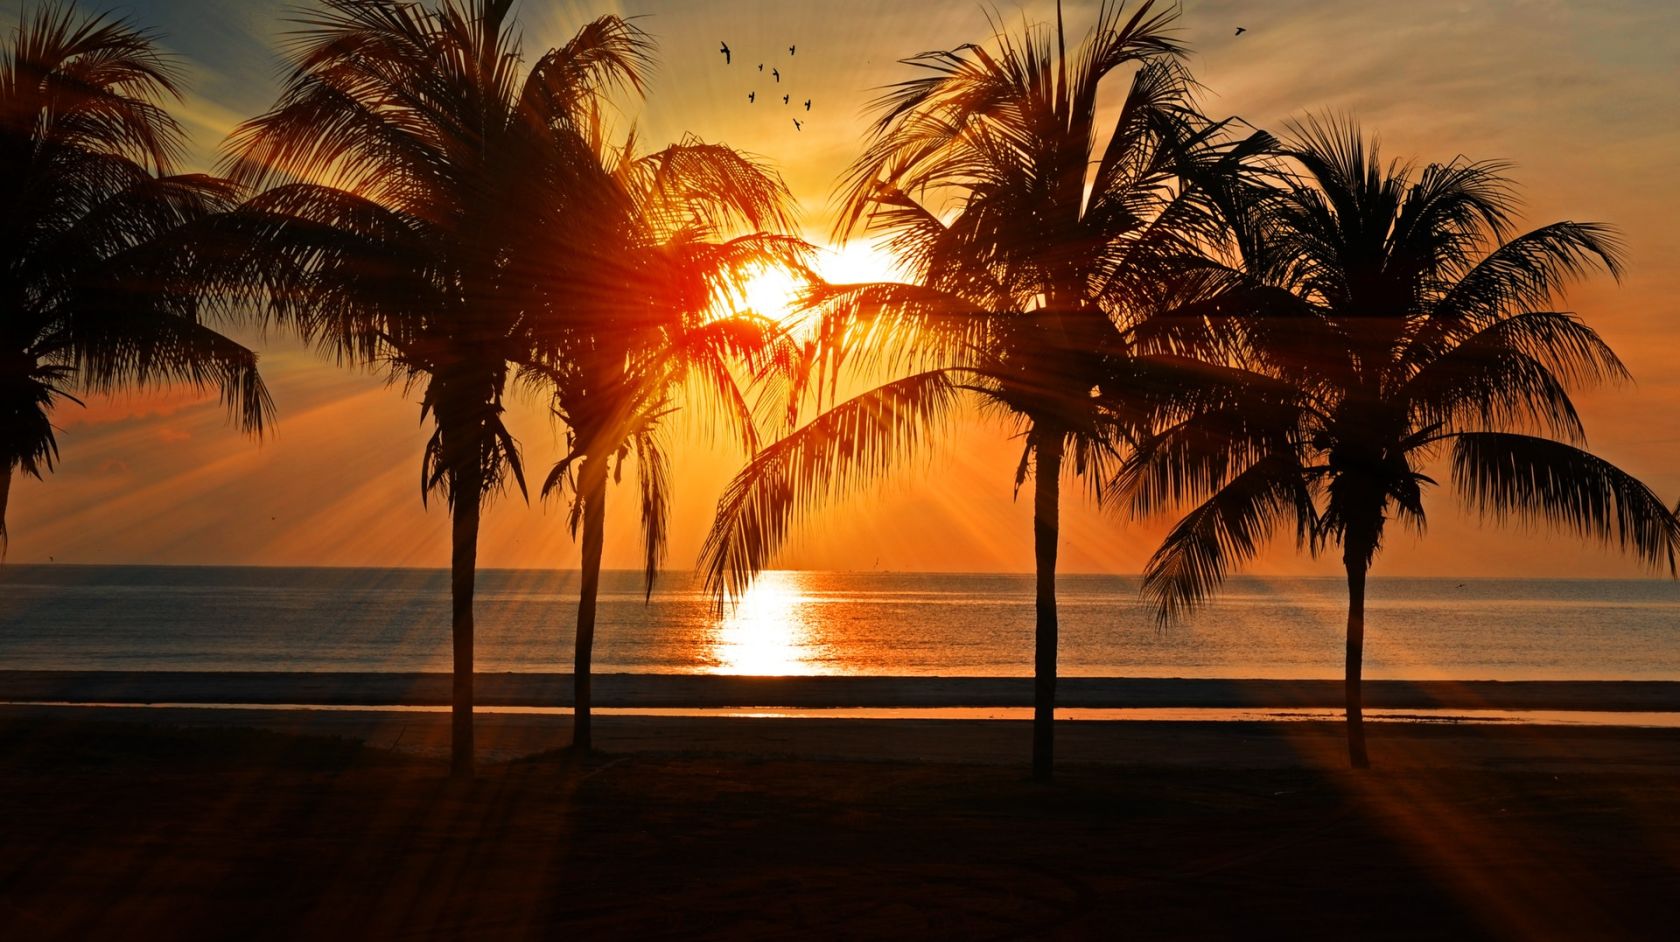 A Palm Tree In Front Of A Sunset